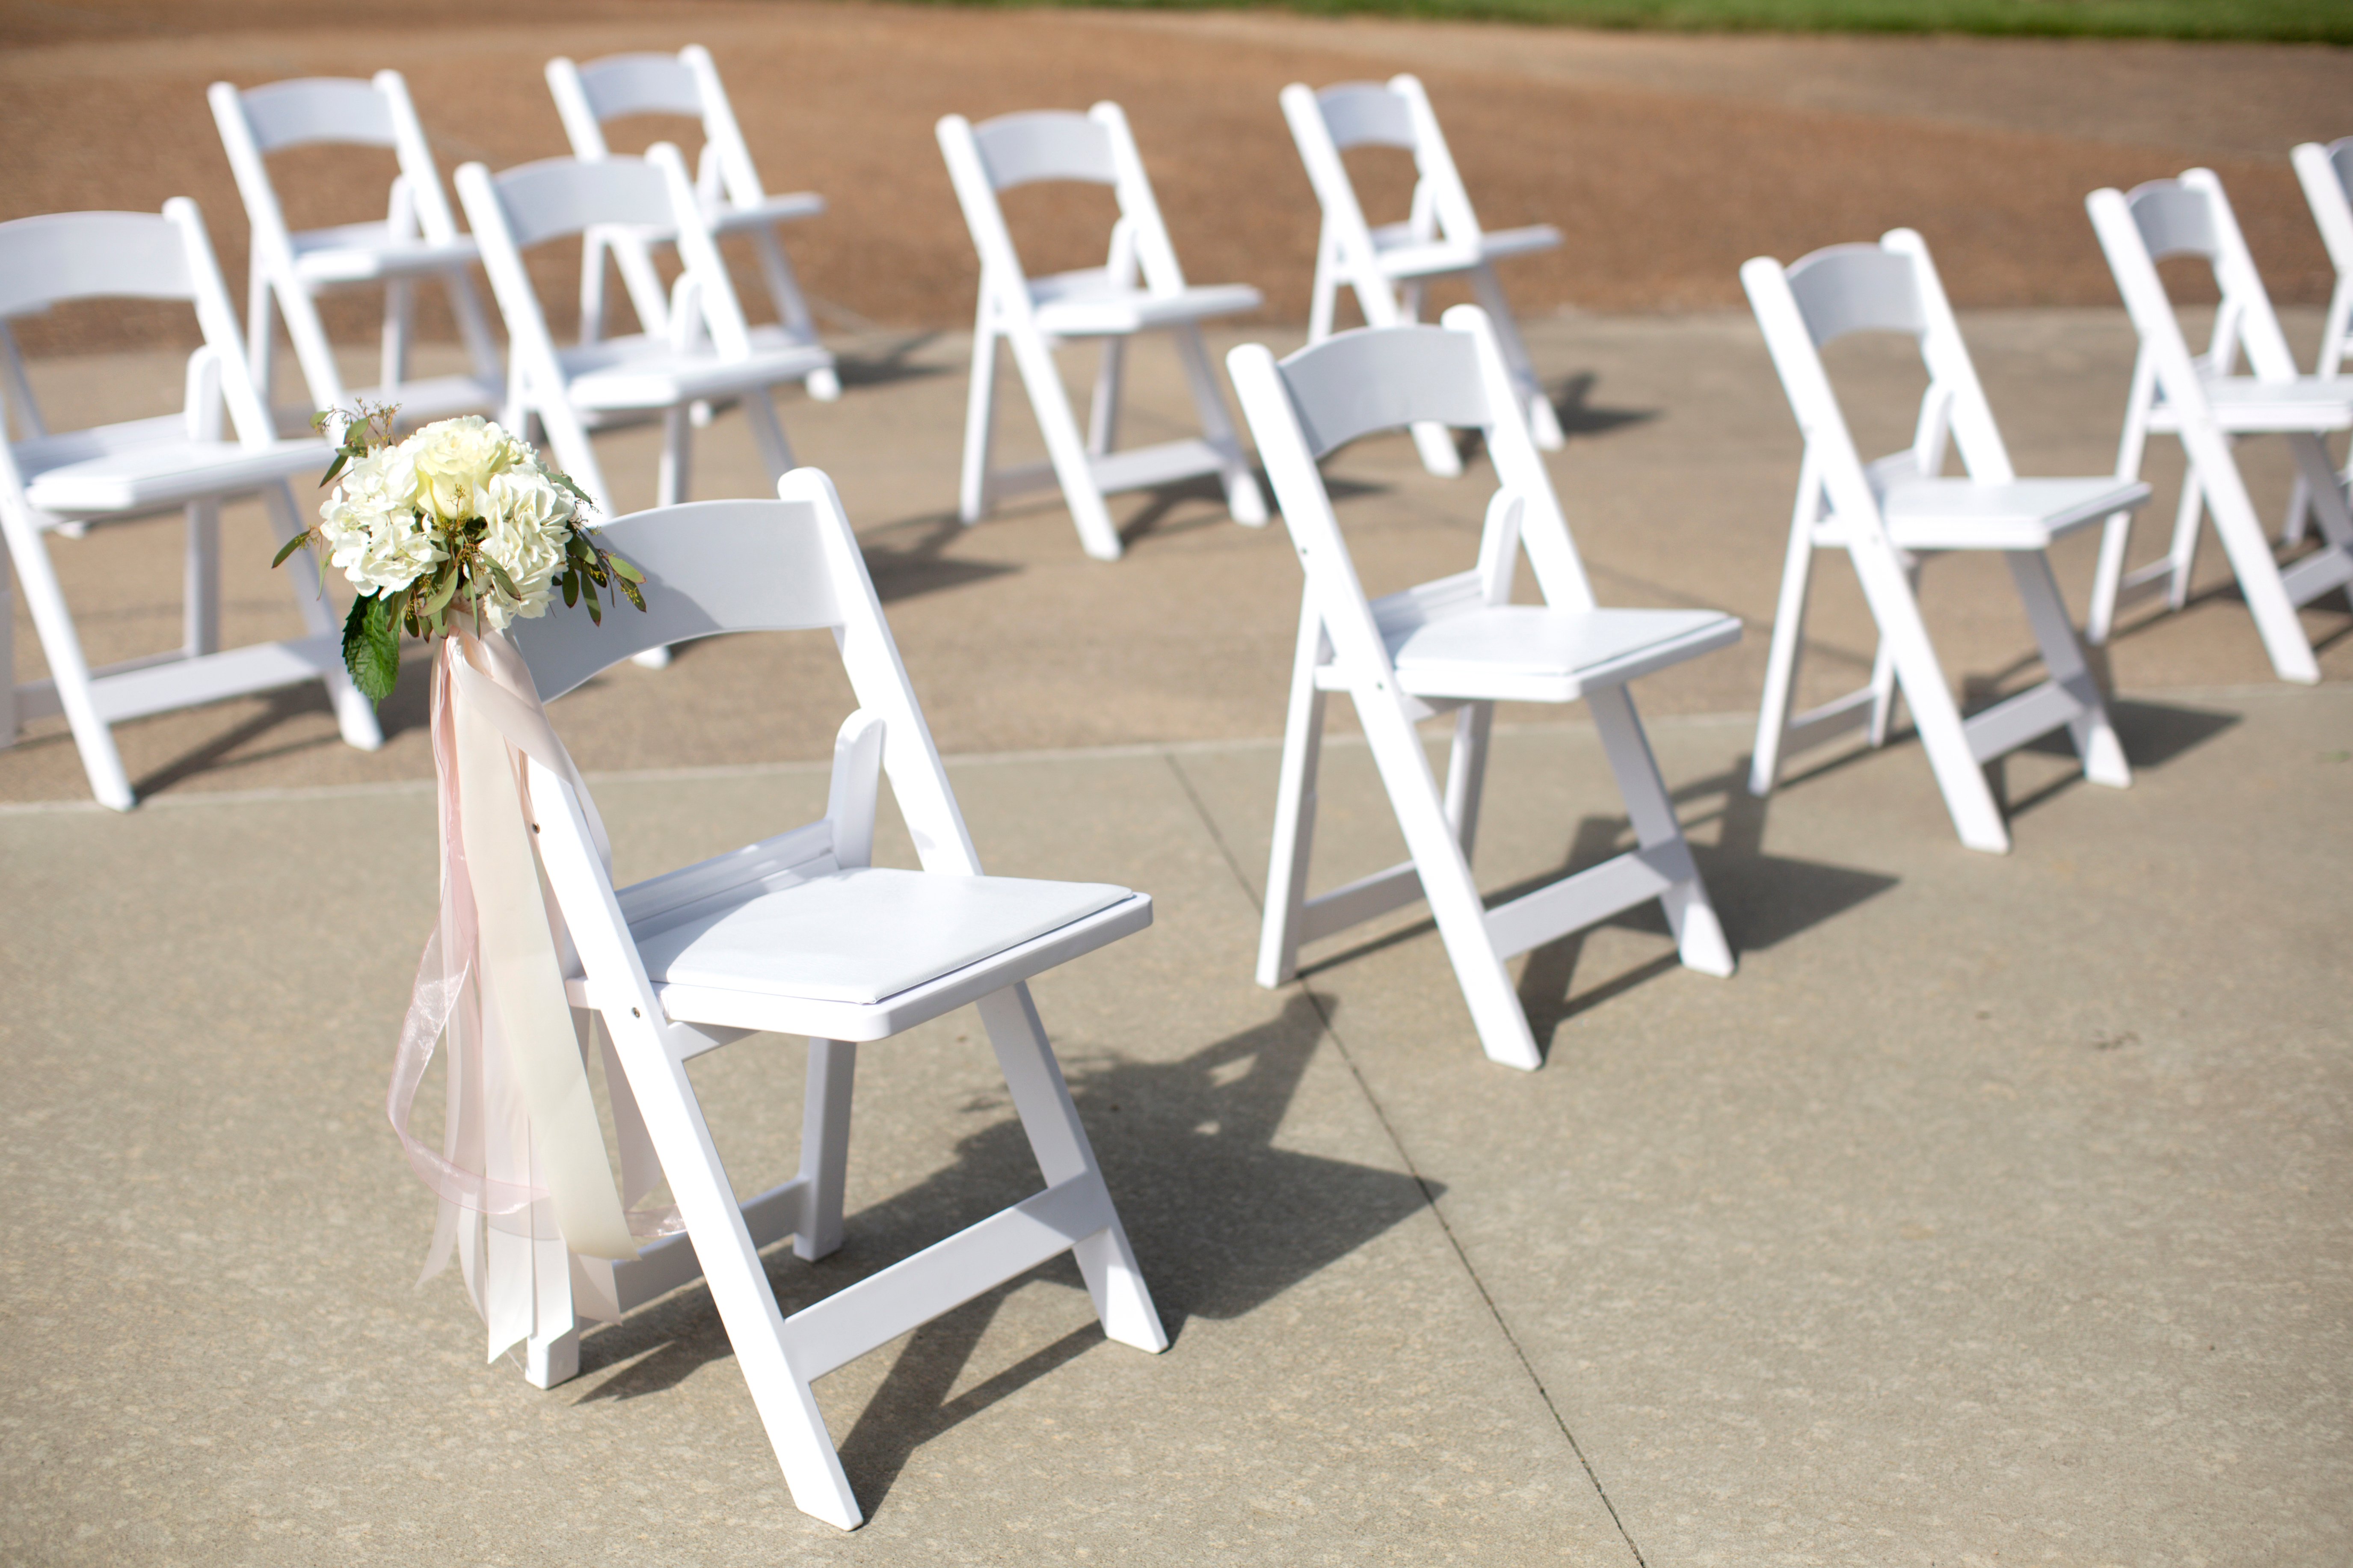 The 2021 Wedding Surge and Health & Safety Market Research